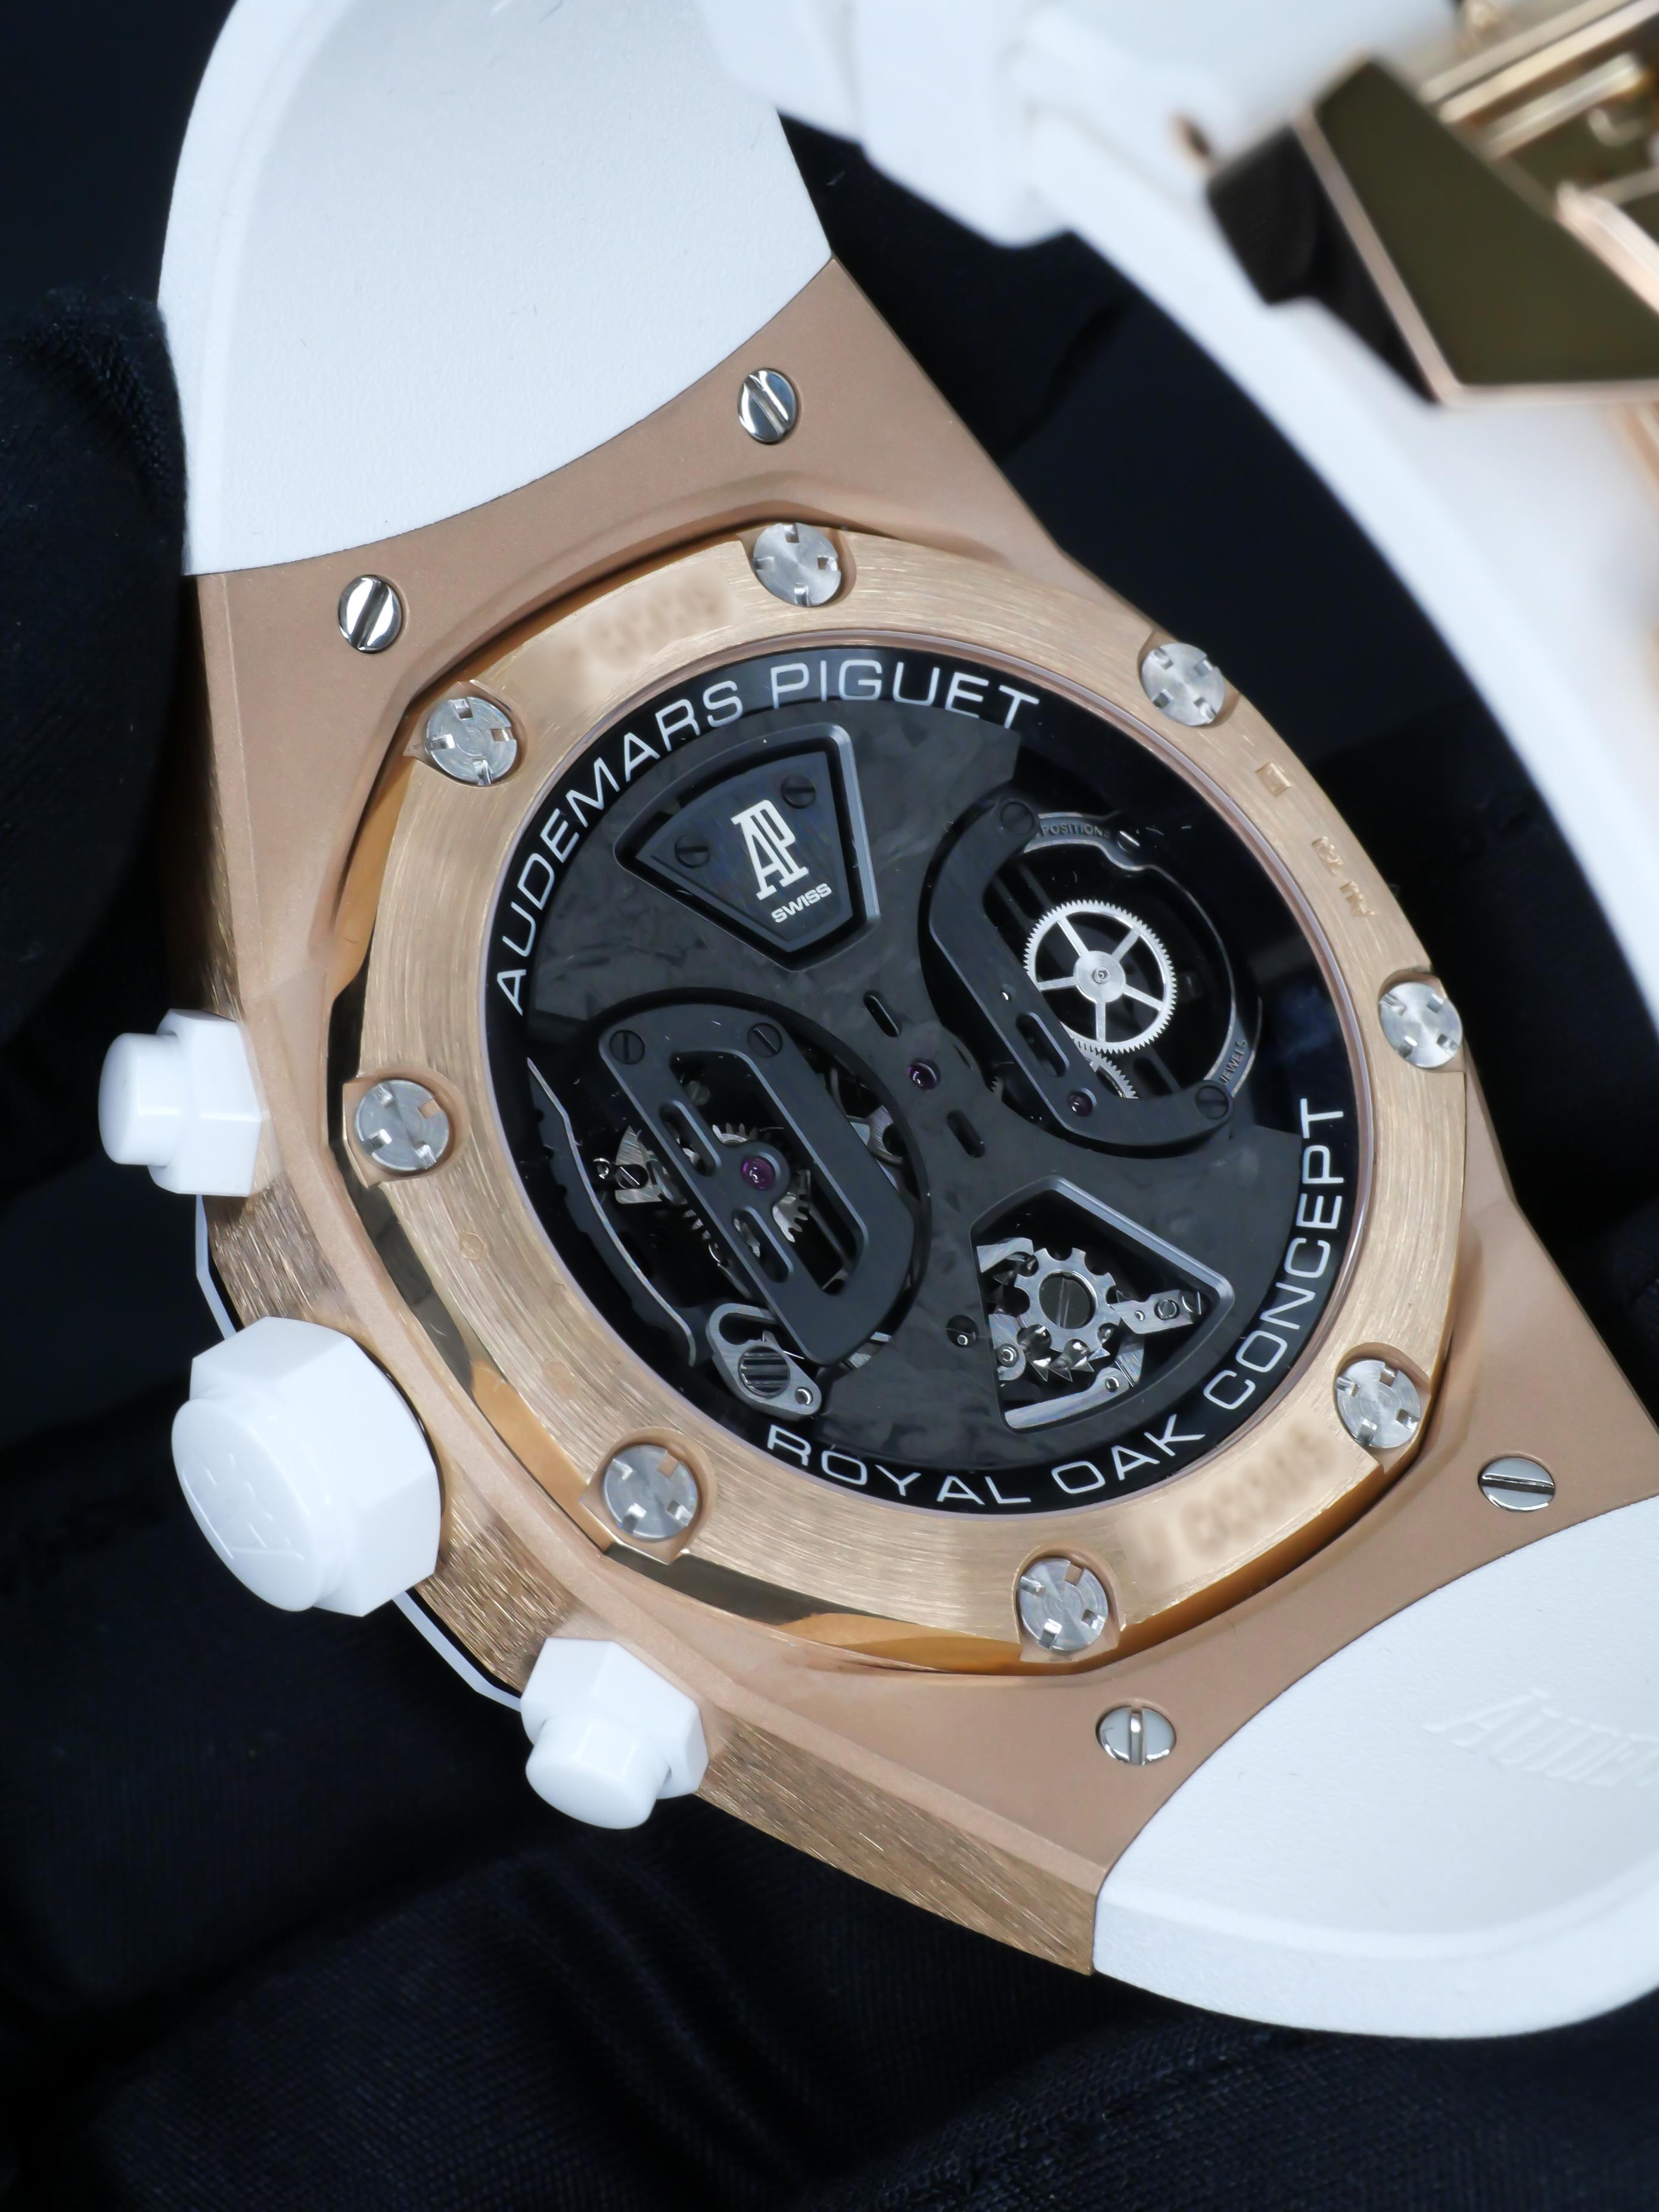 The gravity-defying tourbillon, one of Haute Horlogerie’s most spectacular complications, gets special attention from the master watchmakers at Audemars Piguet. The scope of the new offer features exceptional engineering techniques and audacious